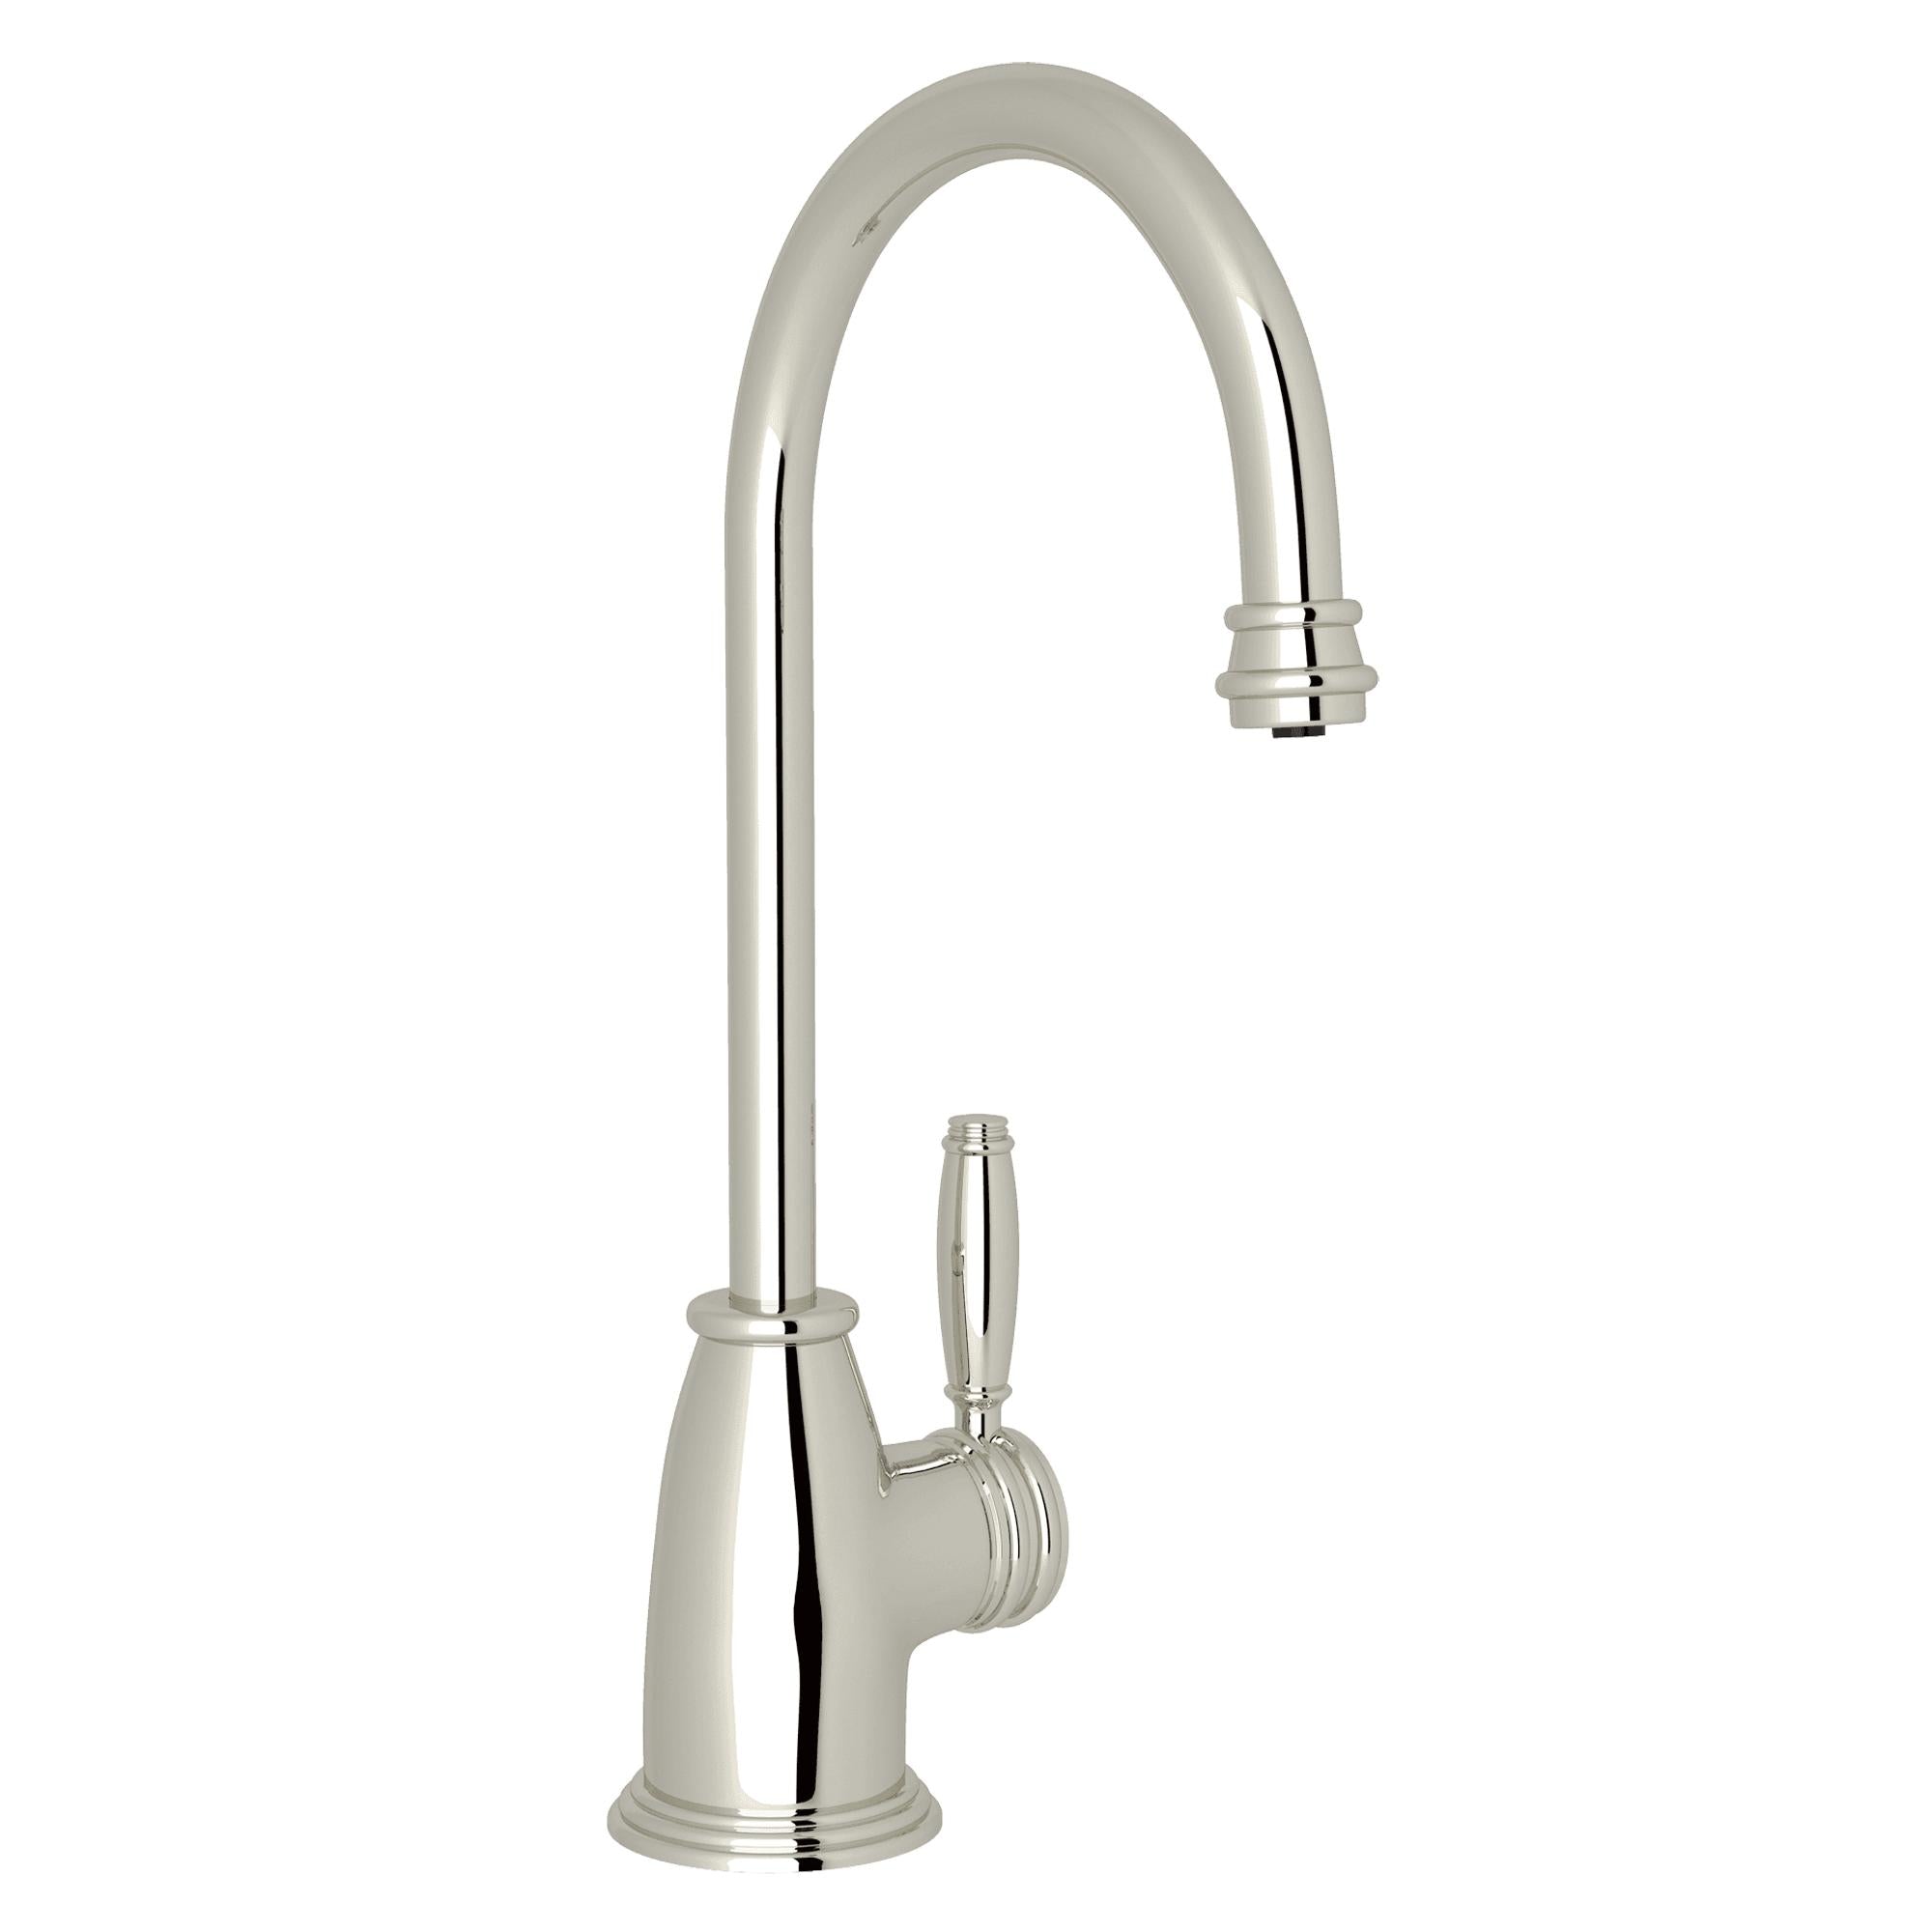 ROHL MB7917 Gotham Filter Kitchen Faucet